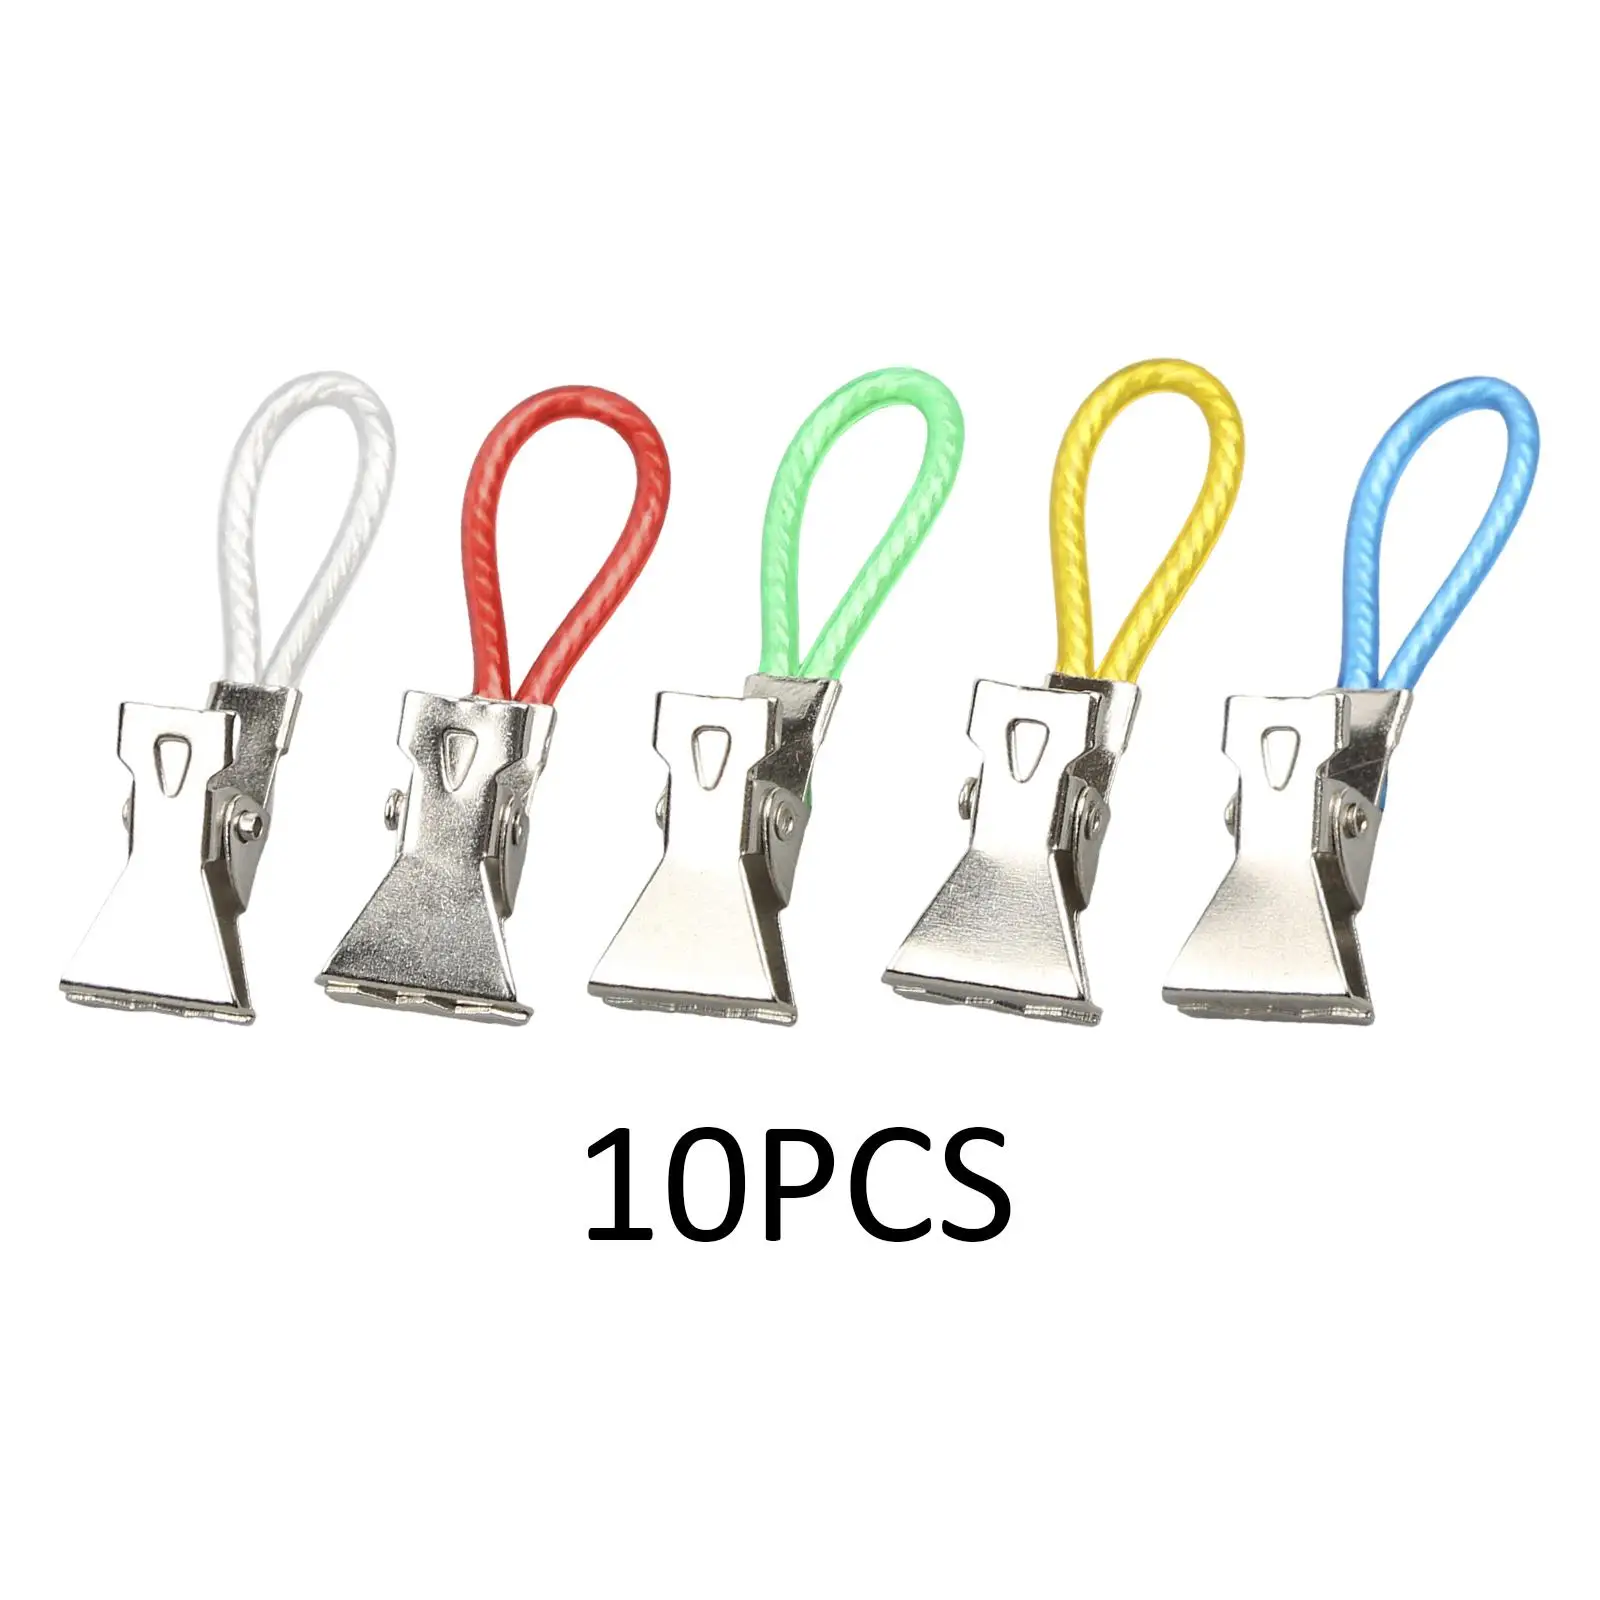 10 Pieces Tea Towel Hanging Clips Cupboard Multifunctional Cloth Hanger Kitchen Towels Clips with Hanging Loop for Small Clothes